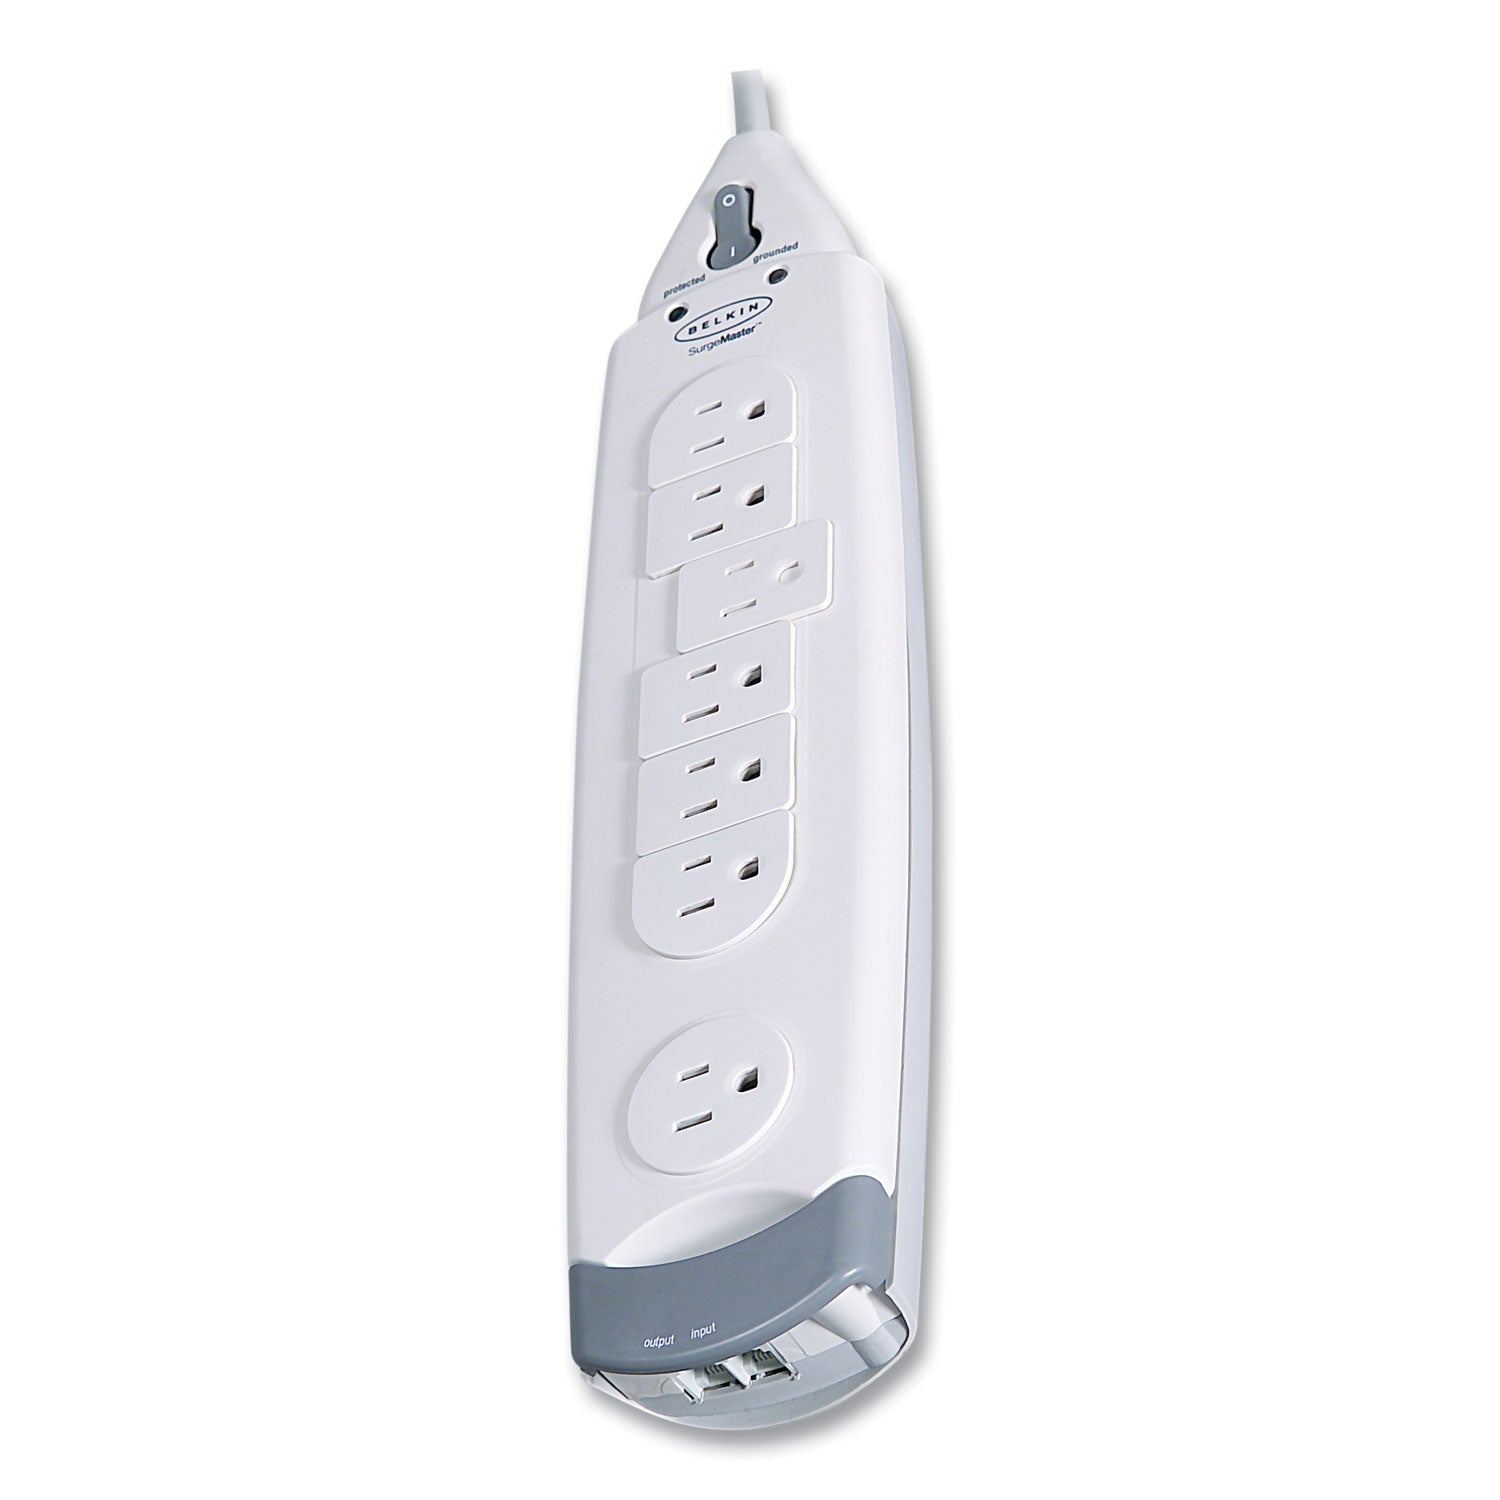 surgemaster-home-series-surge-protector-7-ac-outlets-12-ft-cord-1045-j-white_blkf9h71012 - 1